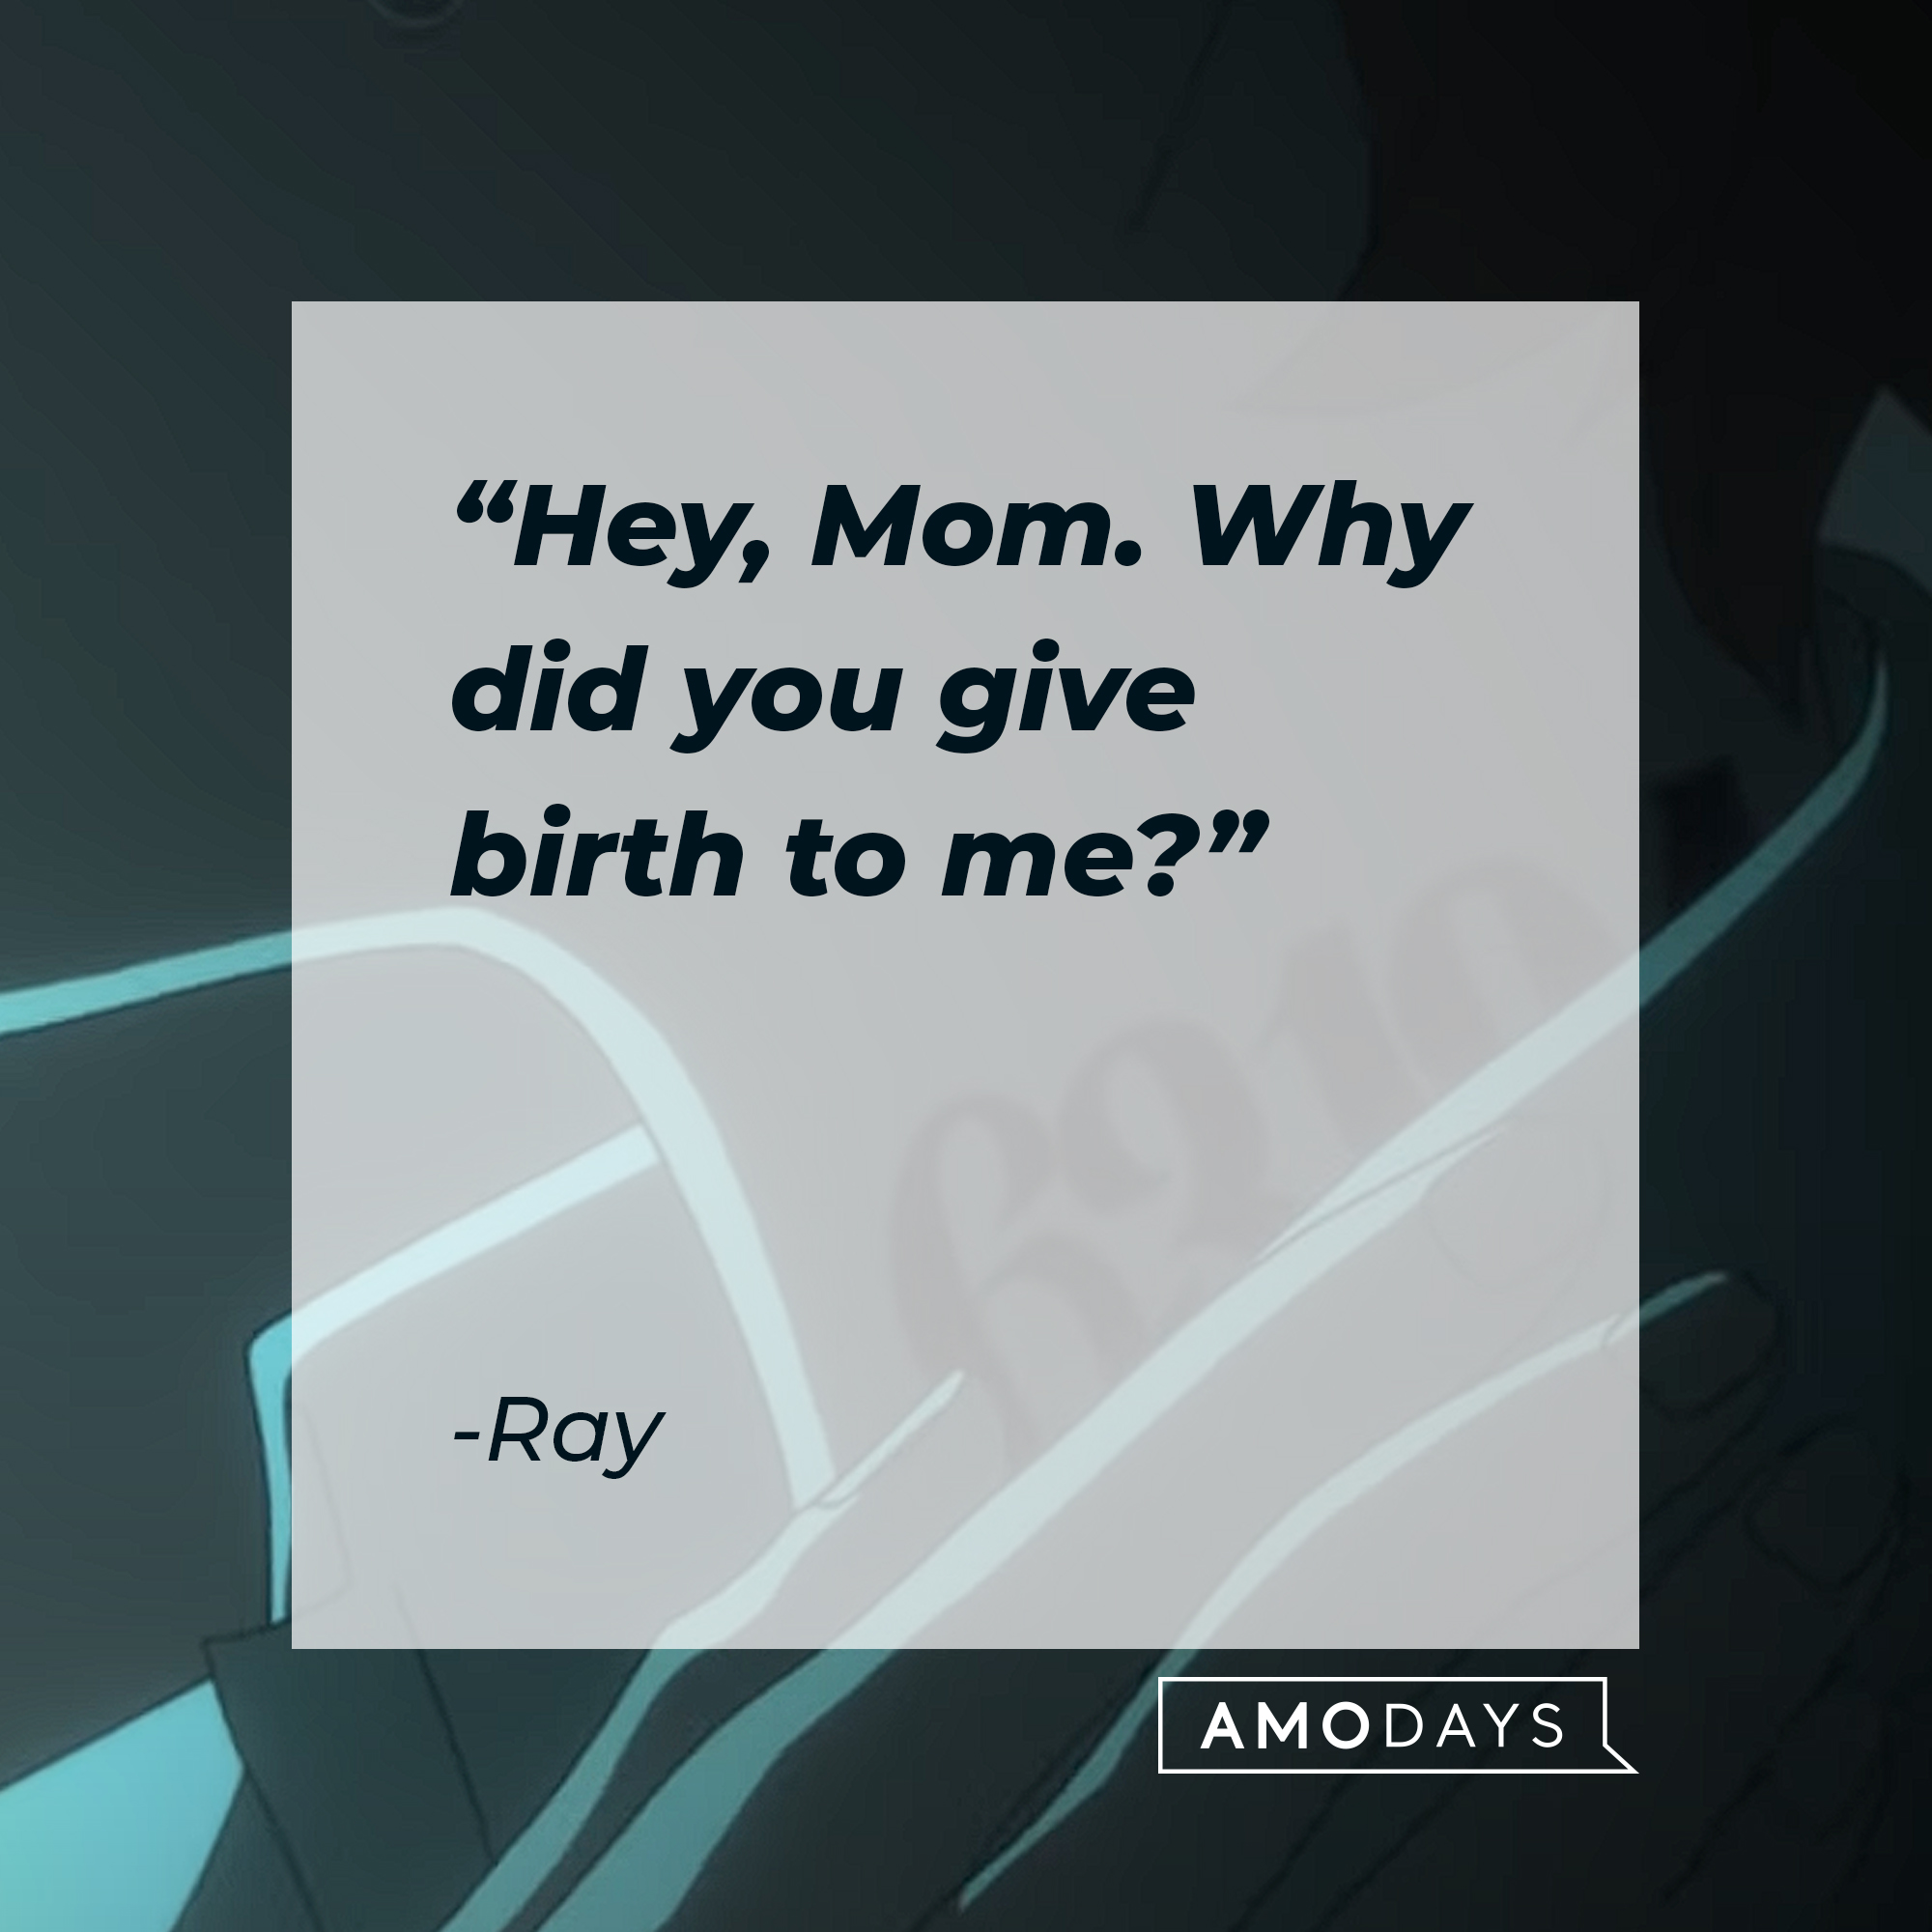 An image from the series “Promise Neverland” with Ray’s quote: "Hey, Mom. Why did you give birth to me?" | Source:  youtube.com/AniplexUSA